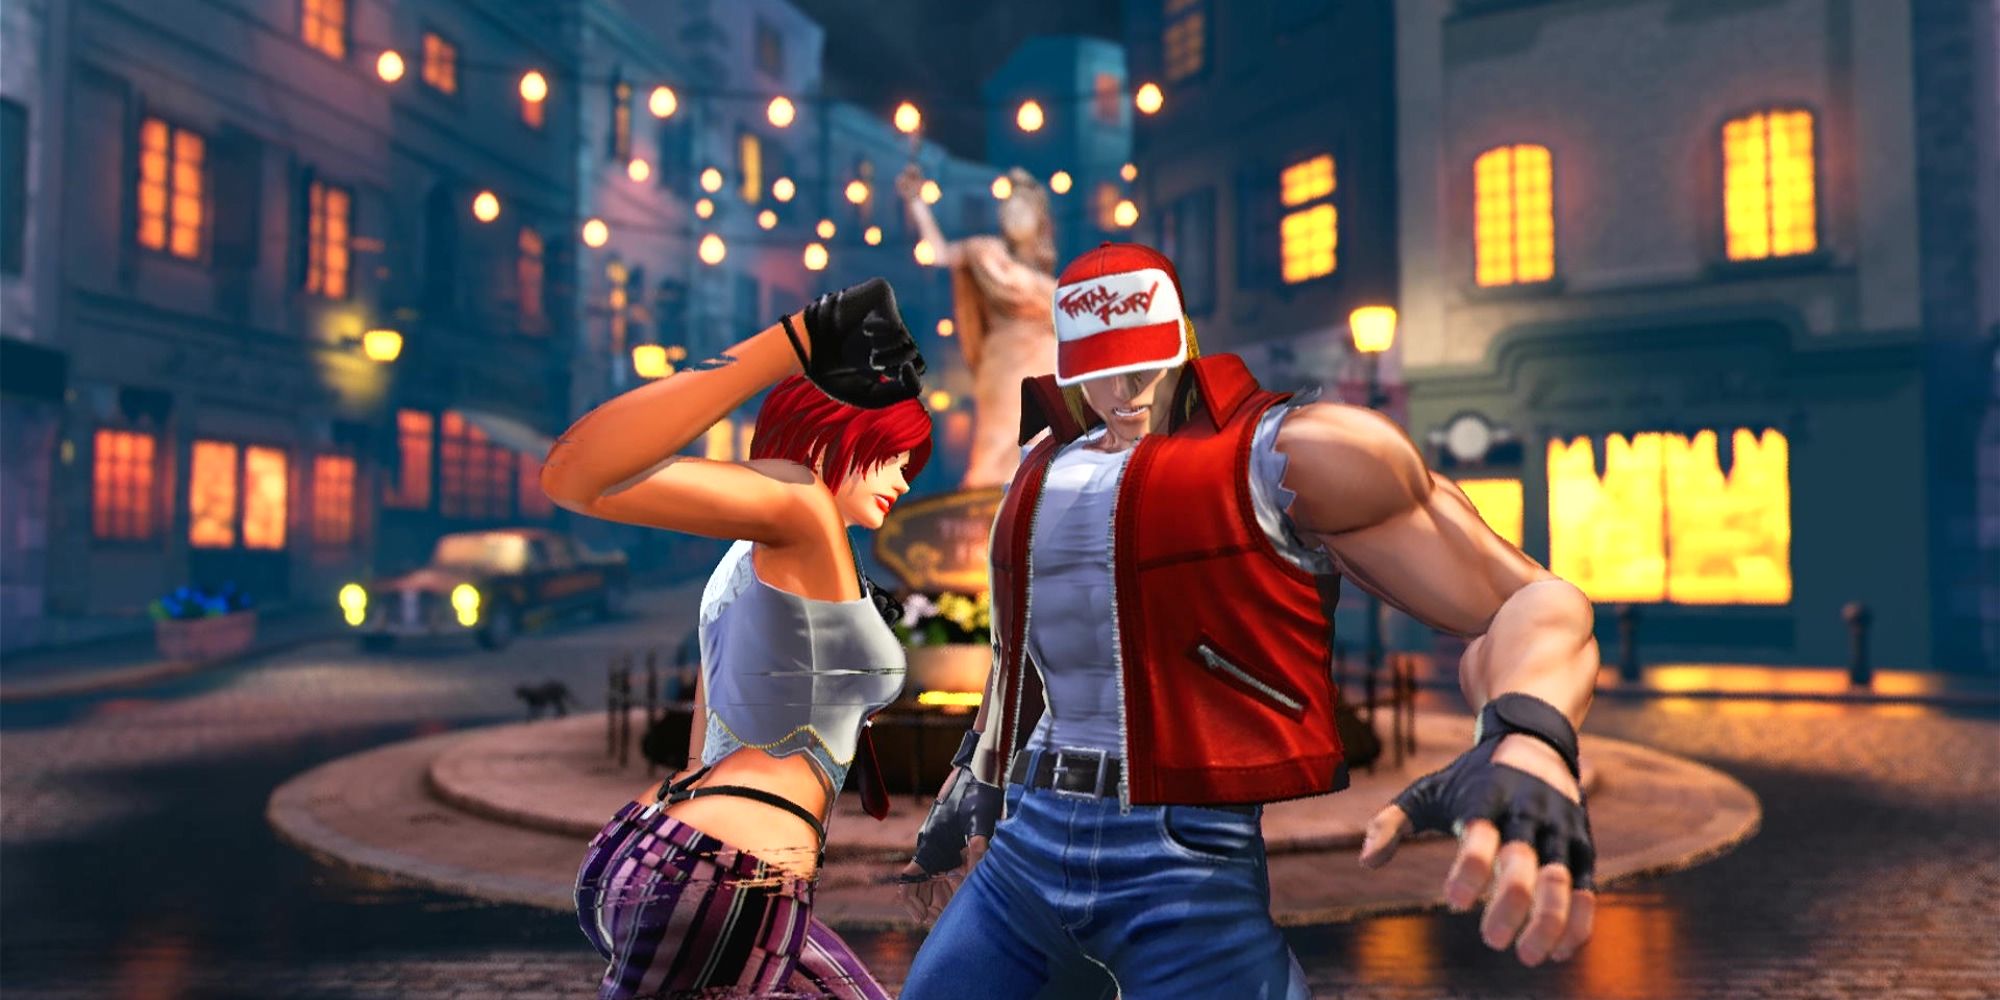 Vanessa moves in slow motion as she punches out Terry Bogard with her Infinity Puncher Climax Super Special Move in a battle at Provence Main Street. The King Of Fighters 15.